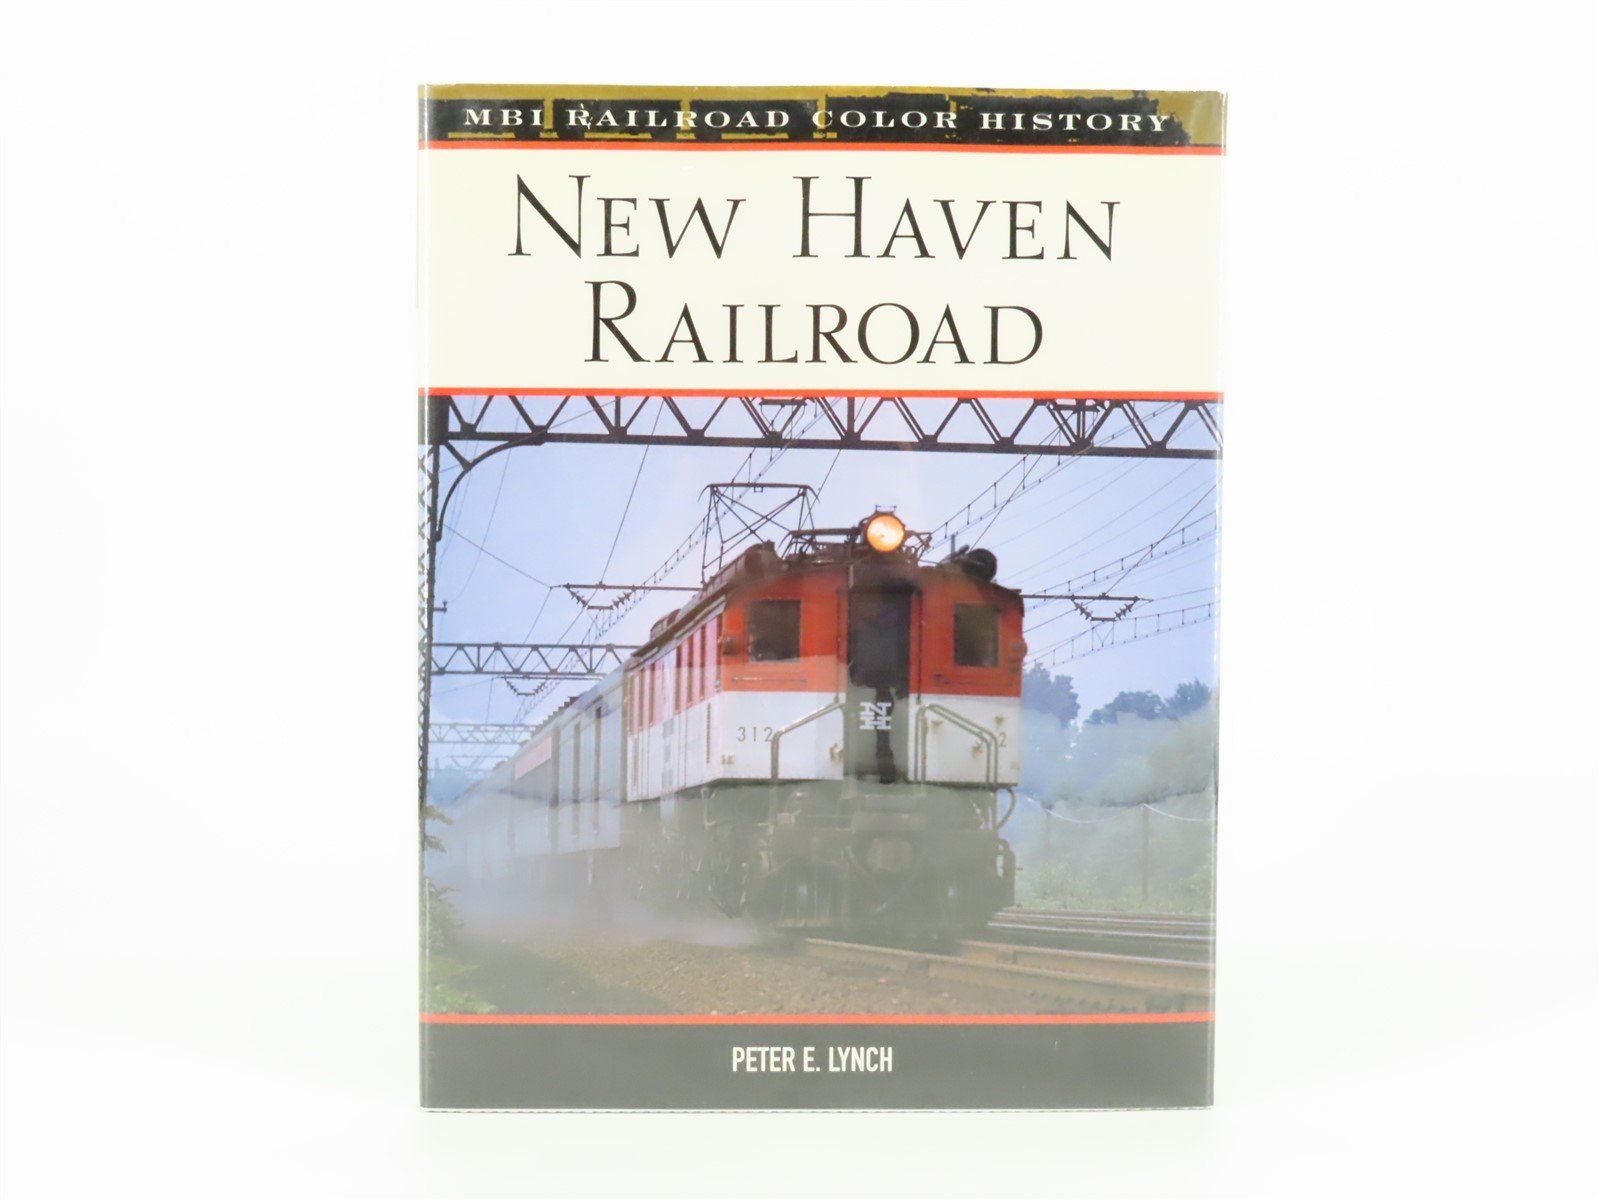 MBI Railroad Color History: New Haven Railroad by Peter E. Lynch ©2003 HC Book